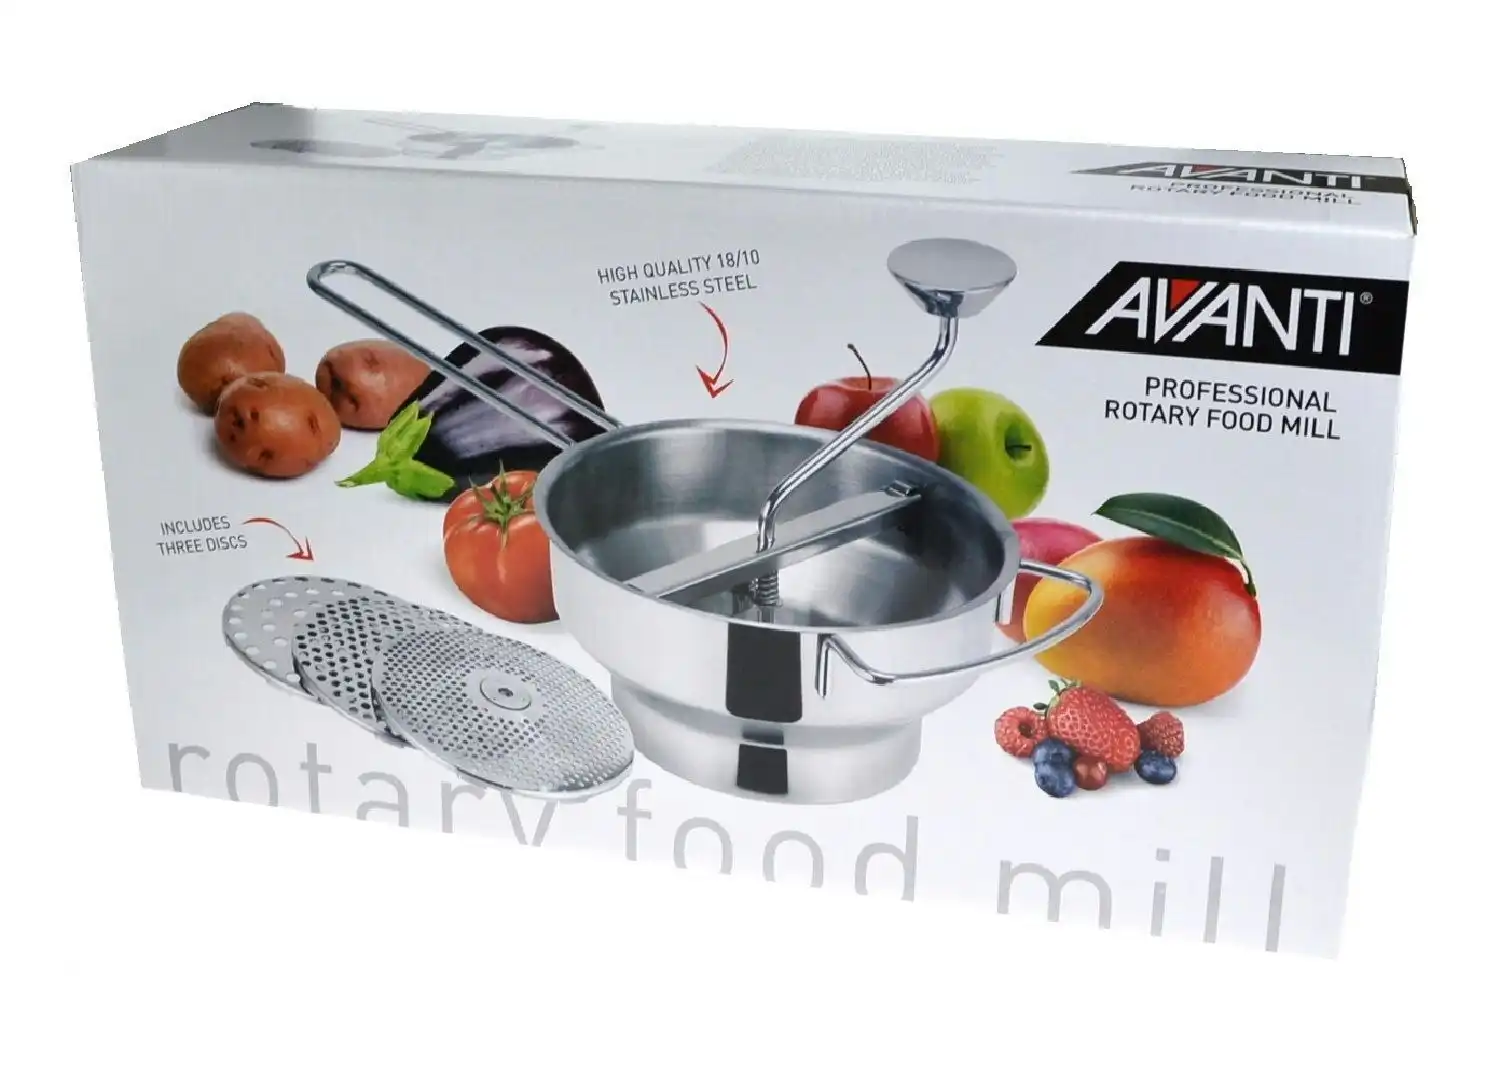 Avanti Professional Rotary Food Mill With 3 Blades